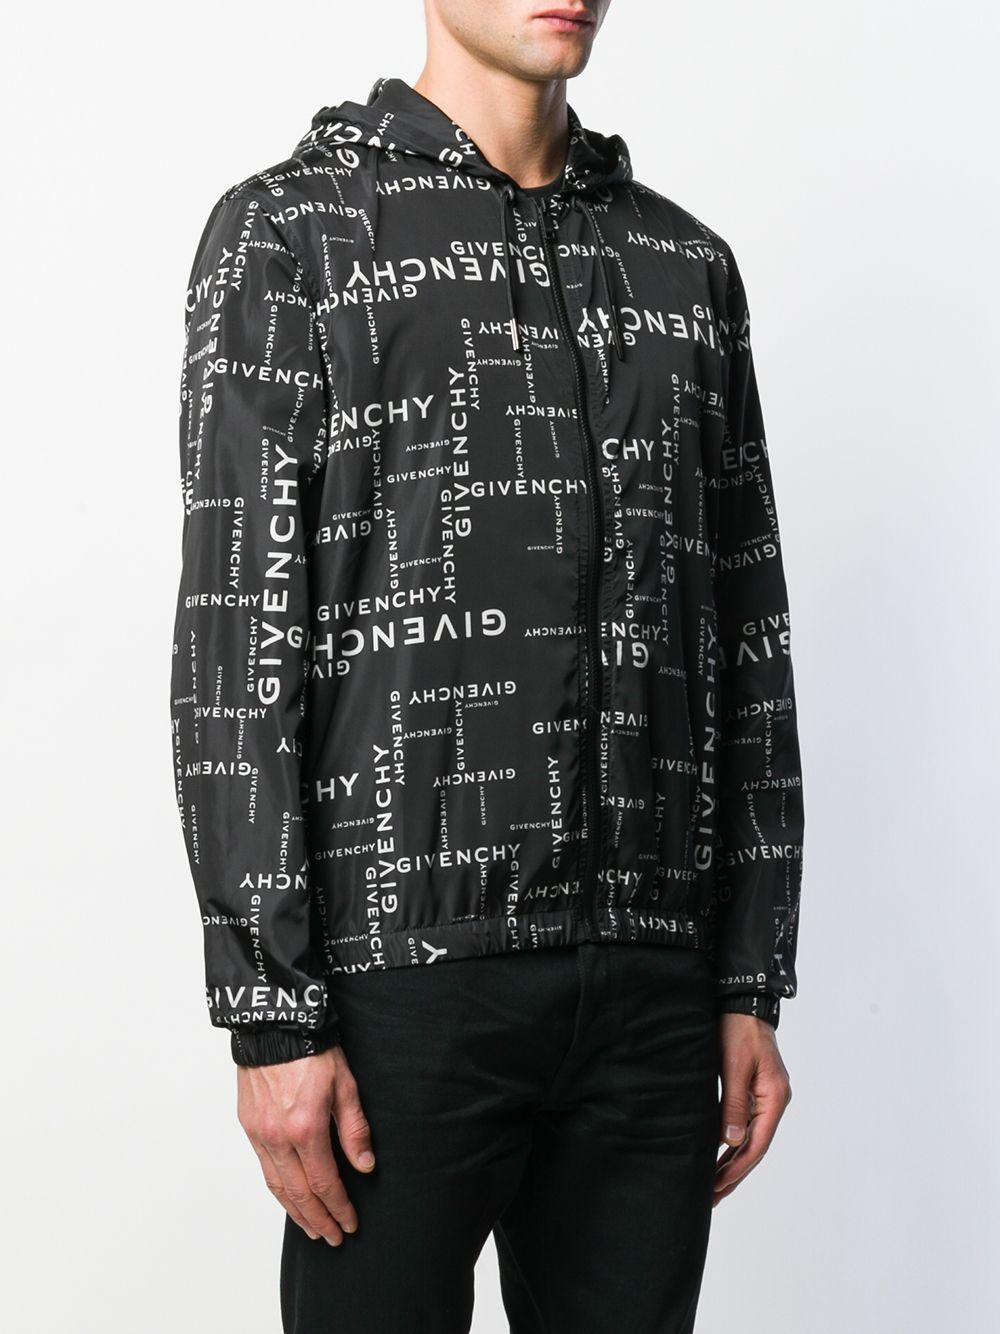 Givenchy Synthetic Logo Print Lightweight Jacket in Black for Men 